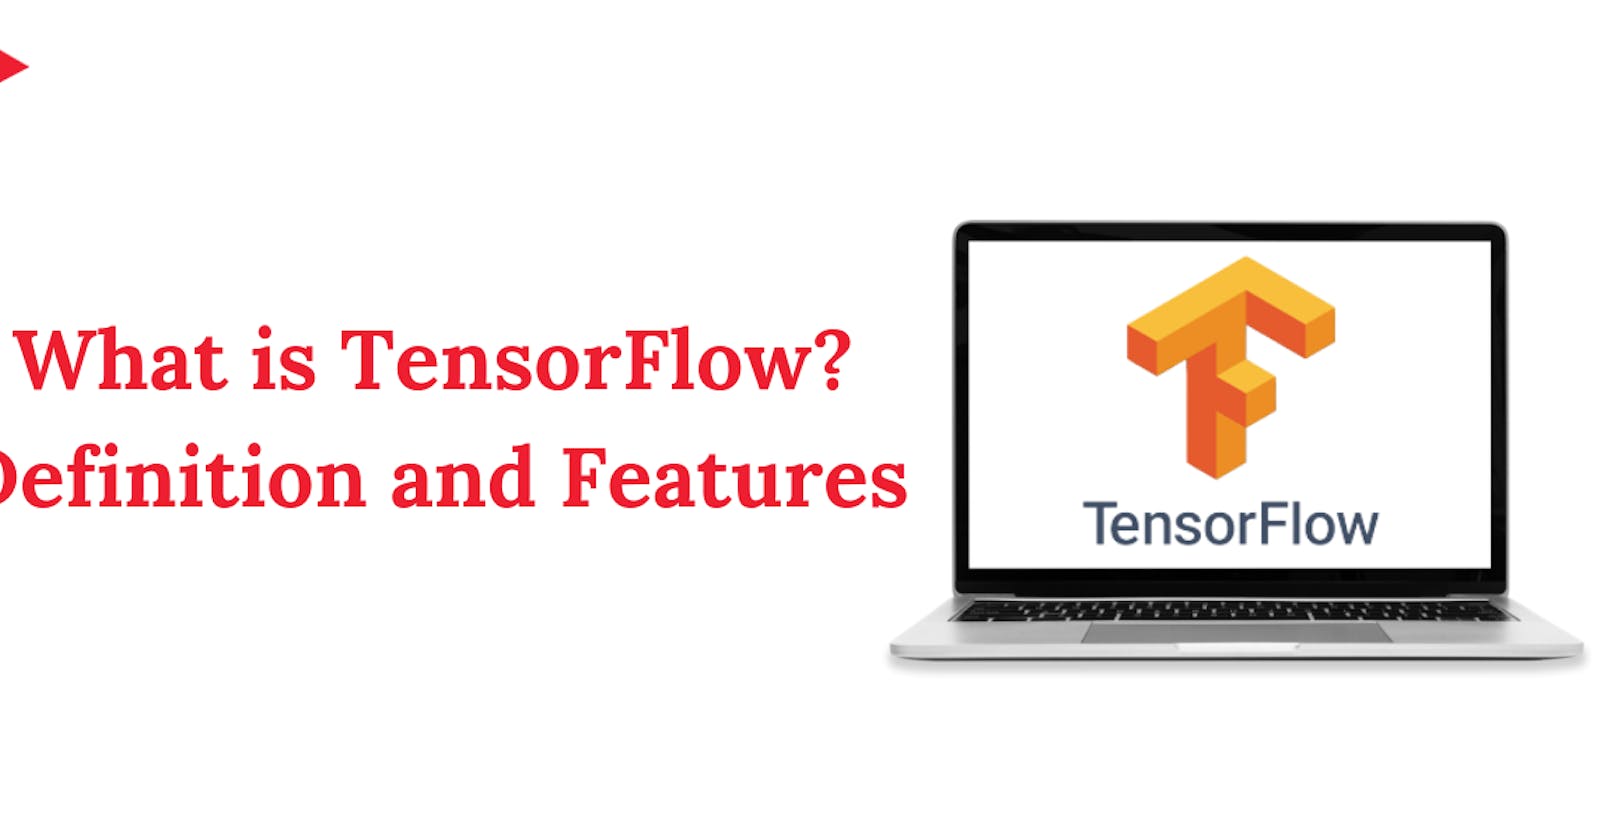 What is TensorFlow? Definition and Features